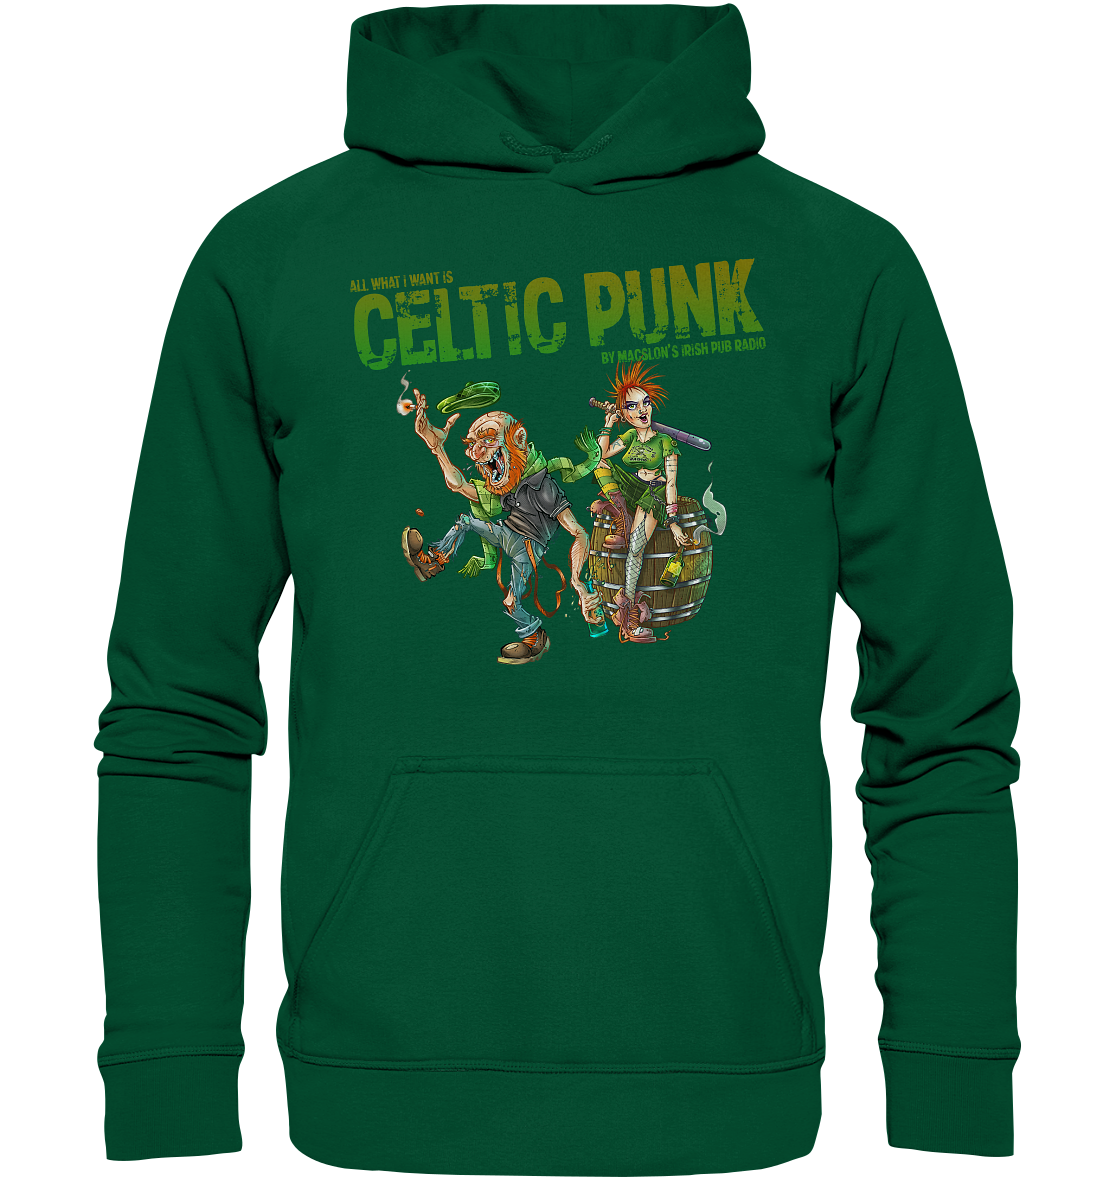 All What I Want Is "Celtic Punk" - Basic Unisex Hoodie